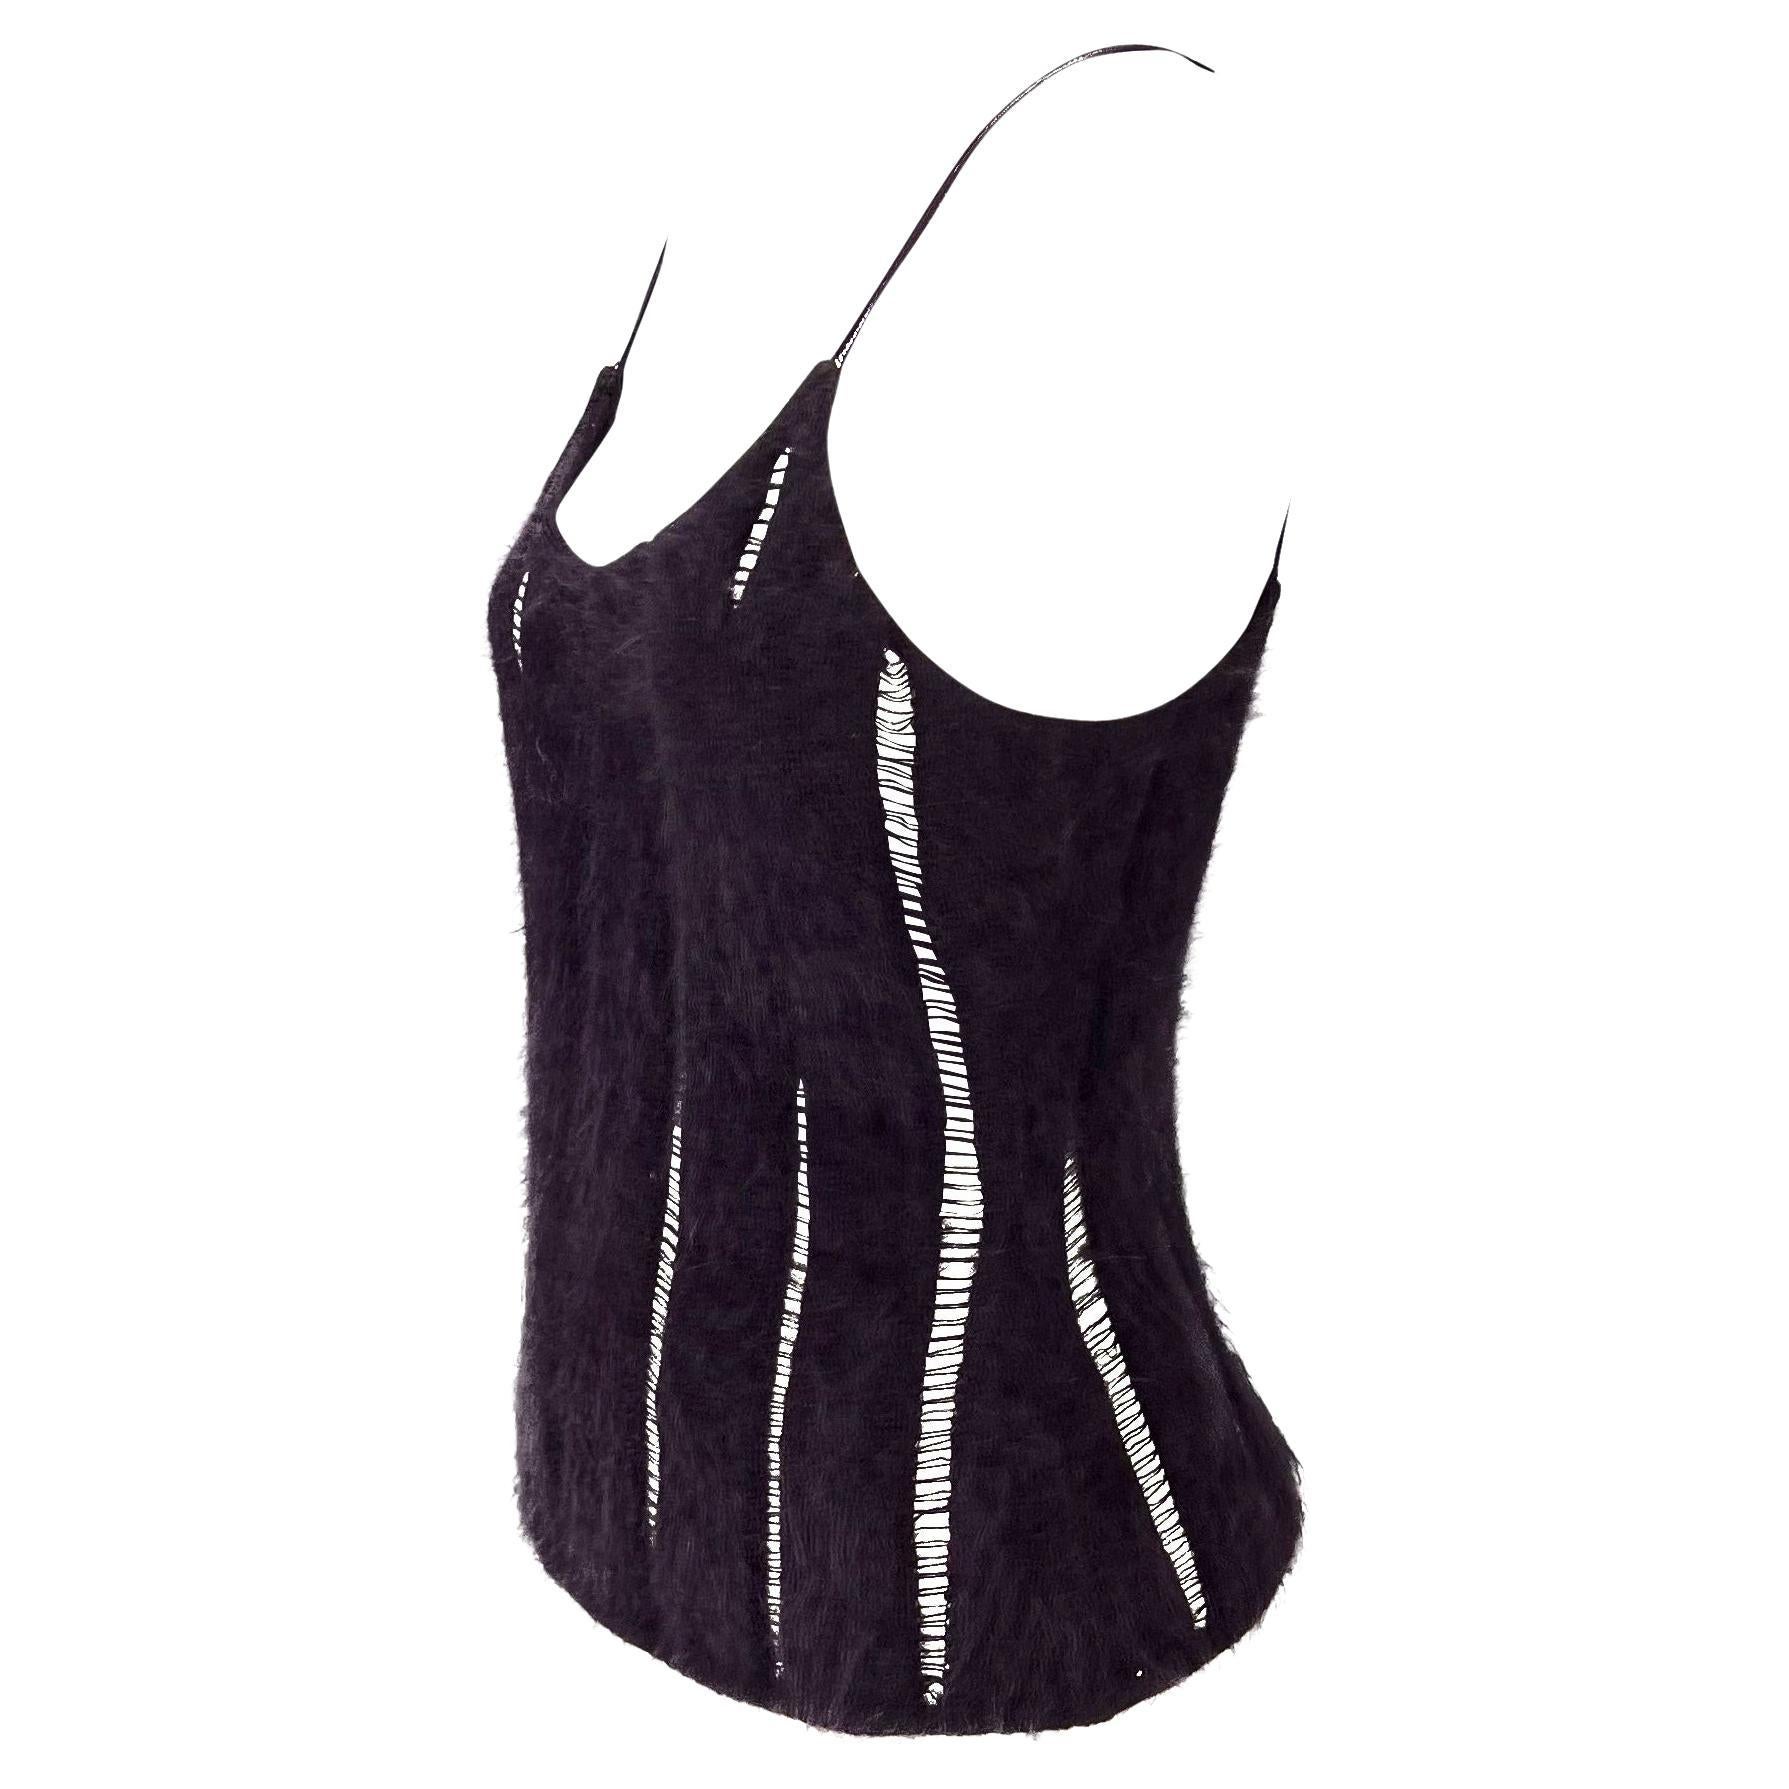 Presenting a purple angora panel Yves Saint Laurent Rive Gauche tank top, designed by Tom Ford. From the Fall/Winter 2001 collection, this knit tank top features panels of lush deep purple angora. Each vertical panel is held together by small pieces